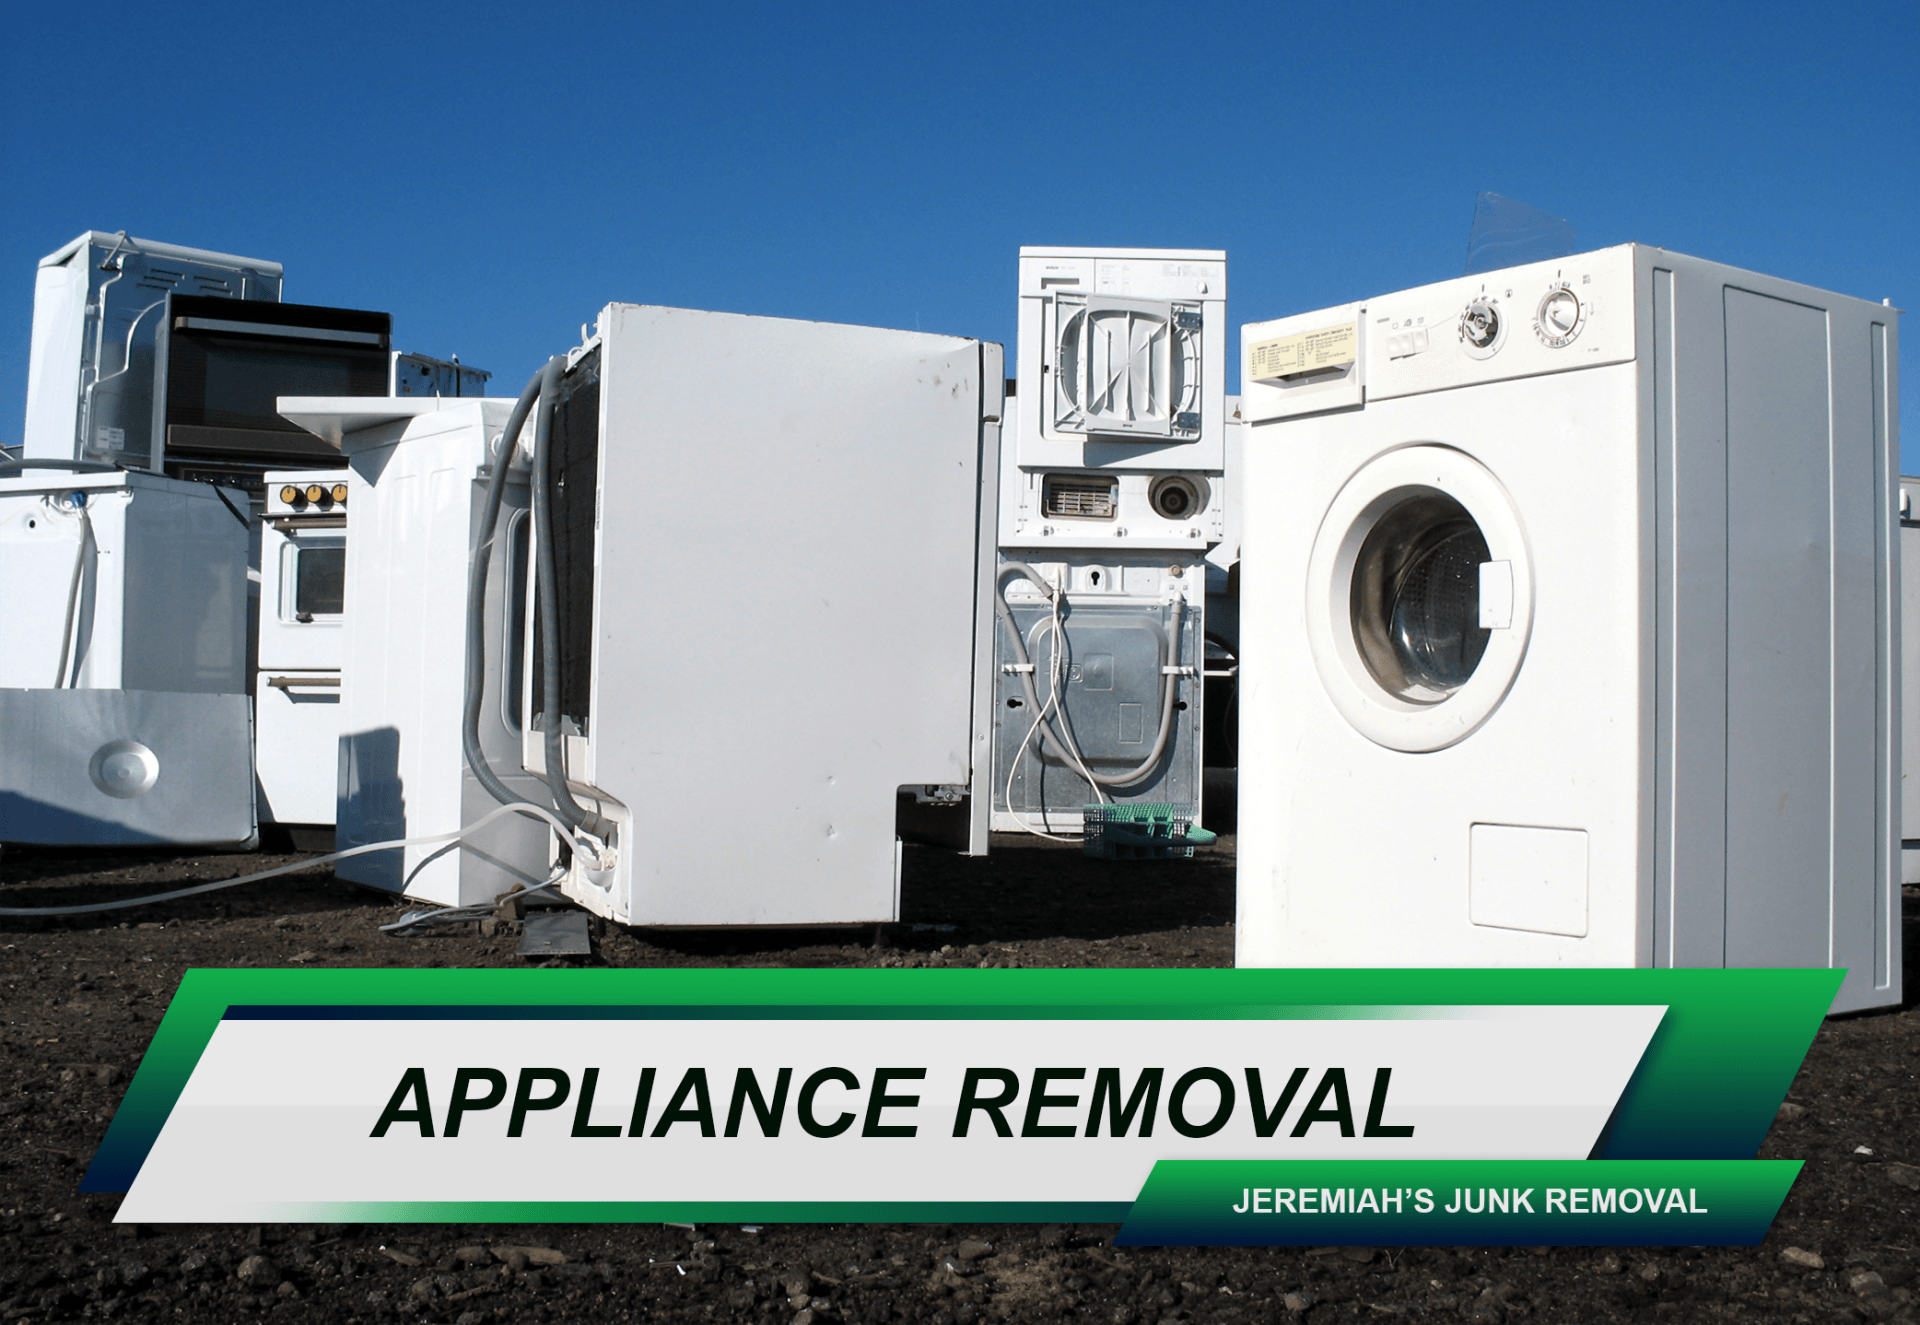 Appliance removal Jamaica